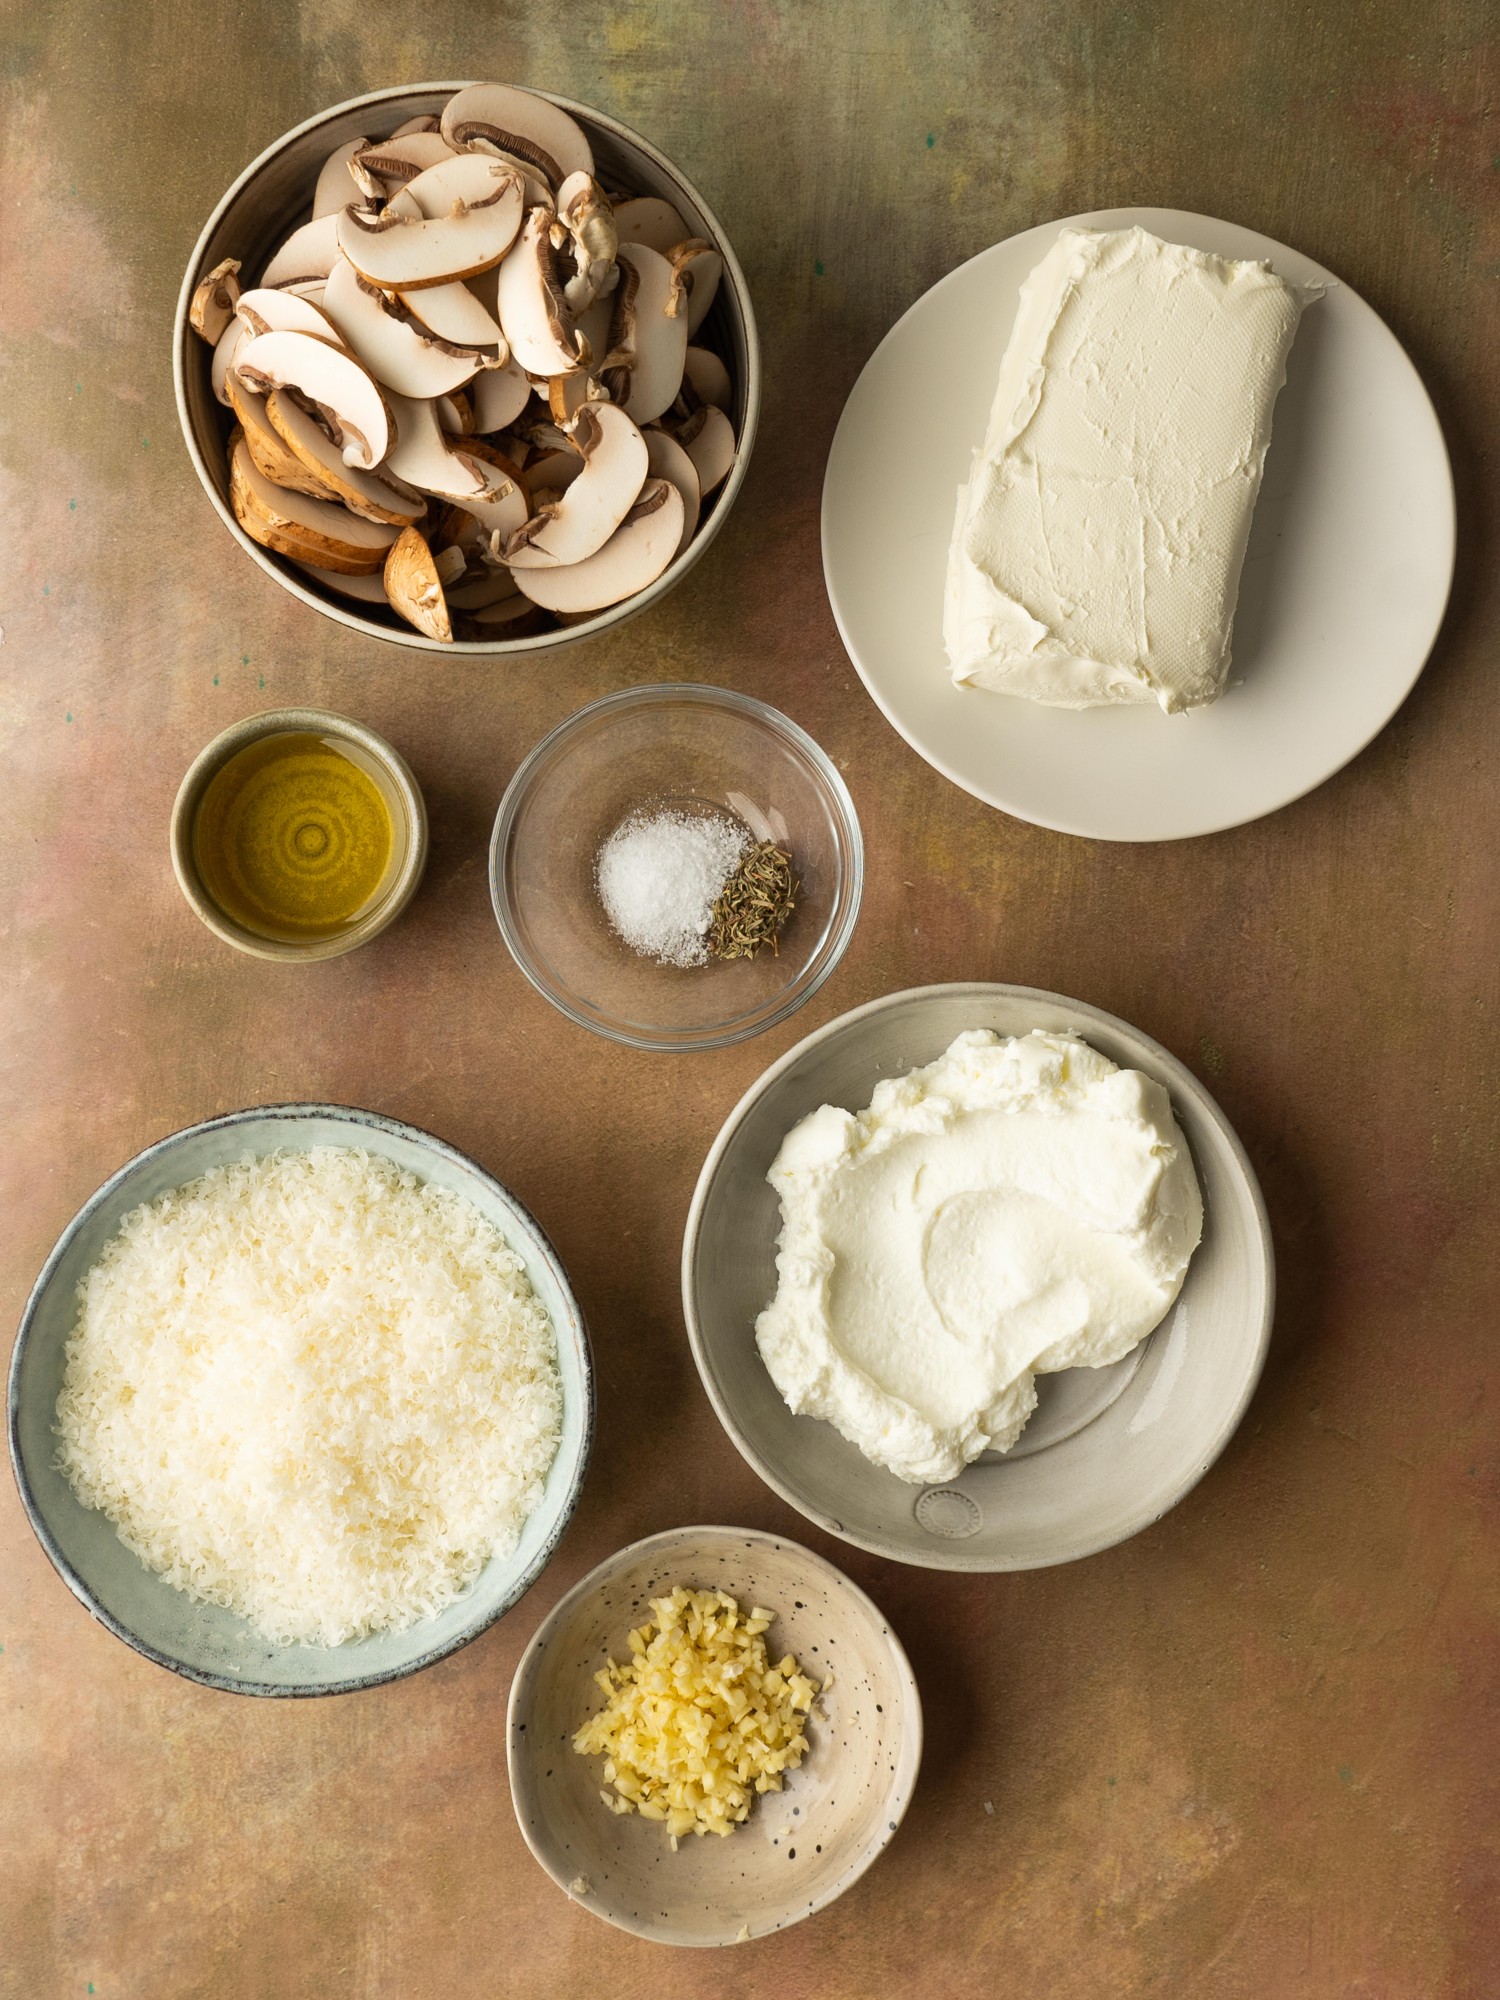 Above view of ingredients for cream cheese stuffed mushroom dip